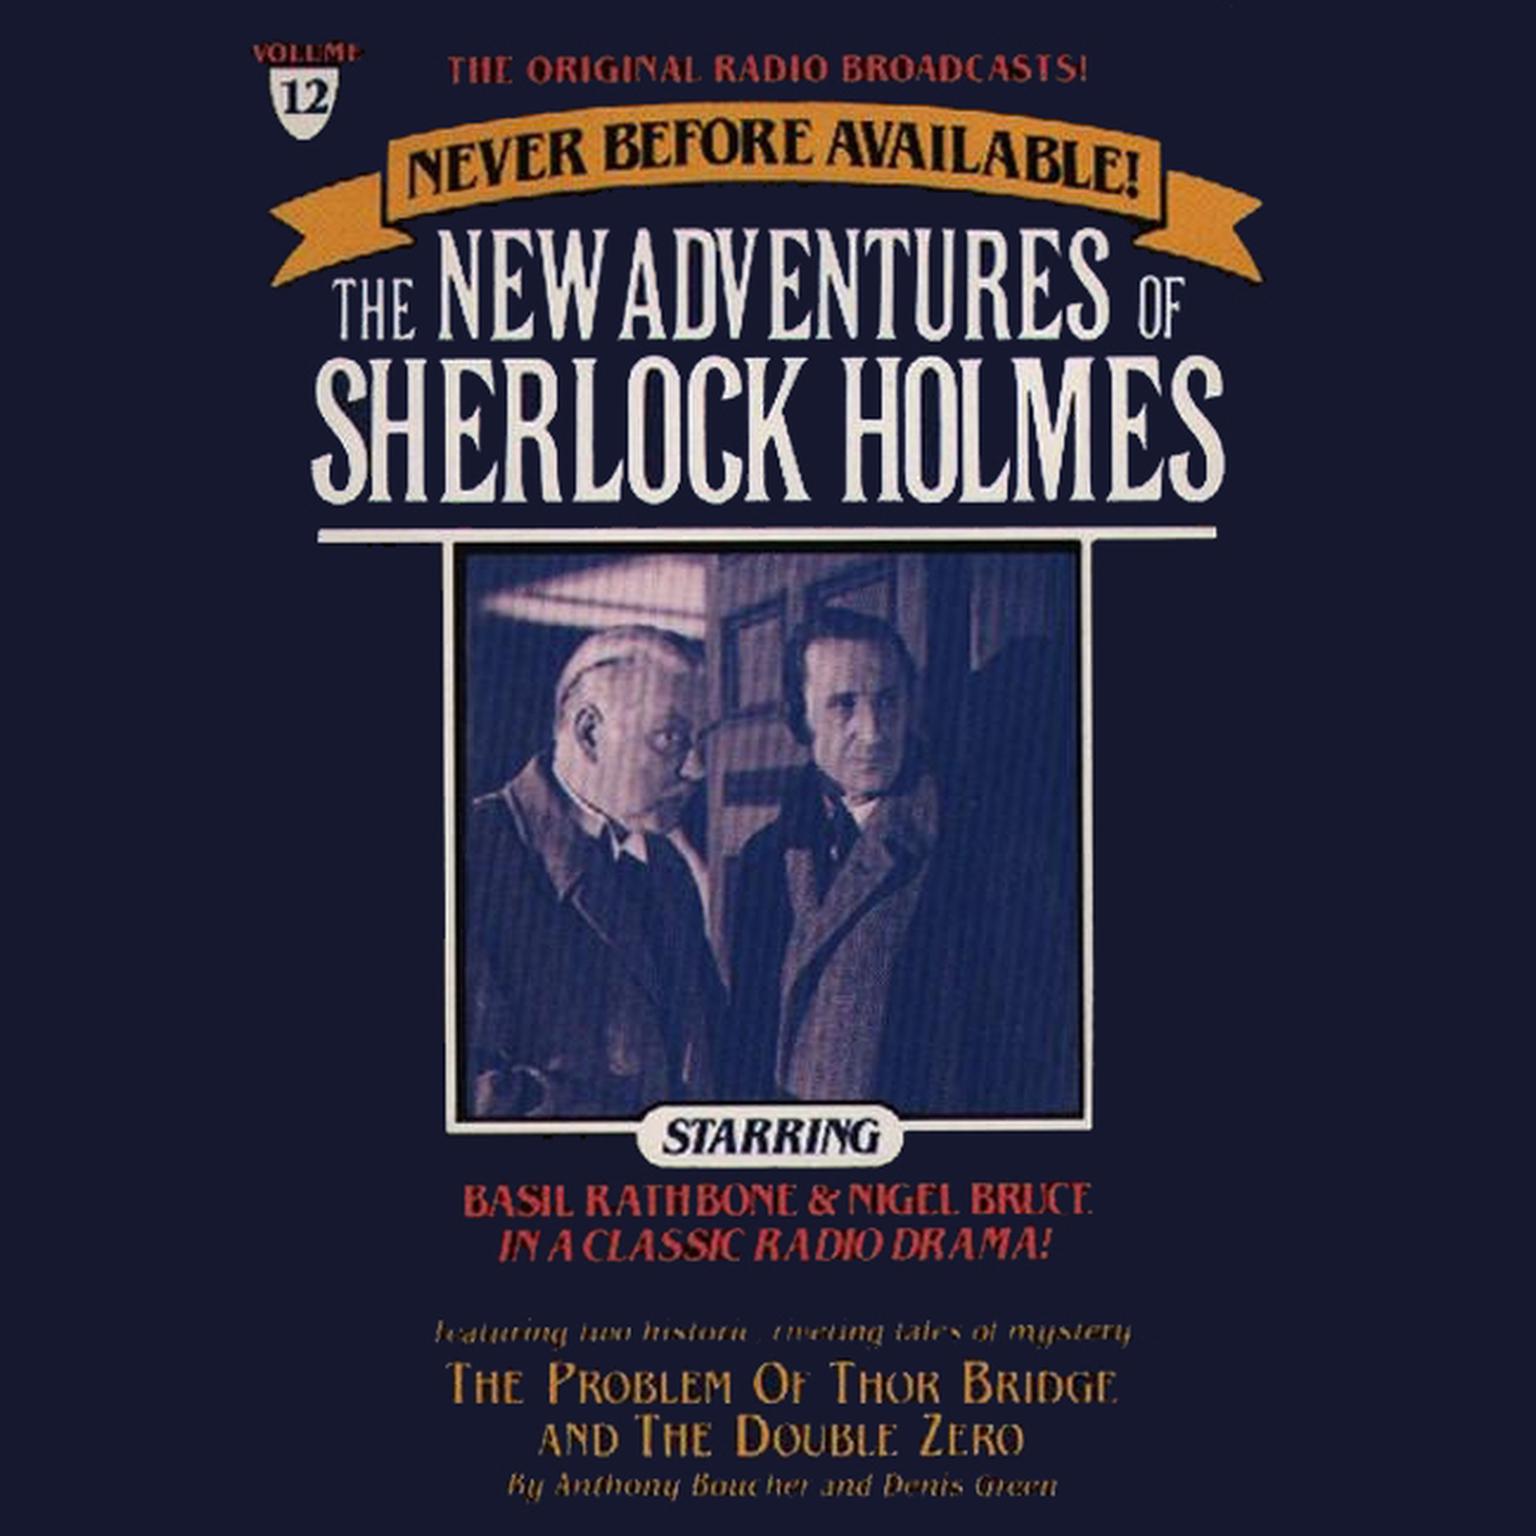 The Problem of Thor Bridge and The Double Zero (Abridged): The New Adventures of Sherlock Holmes, Episode 12 Audiobook, by Anthony Boucher